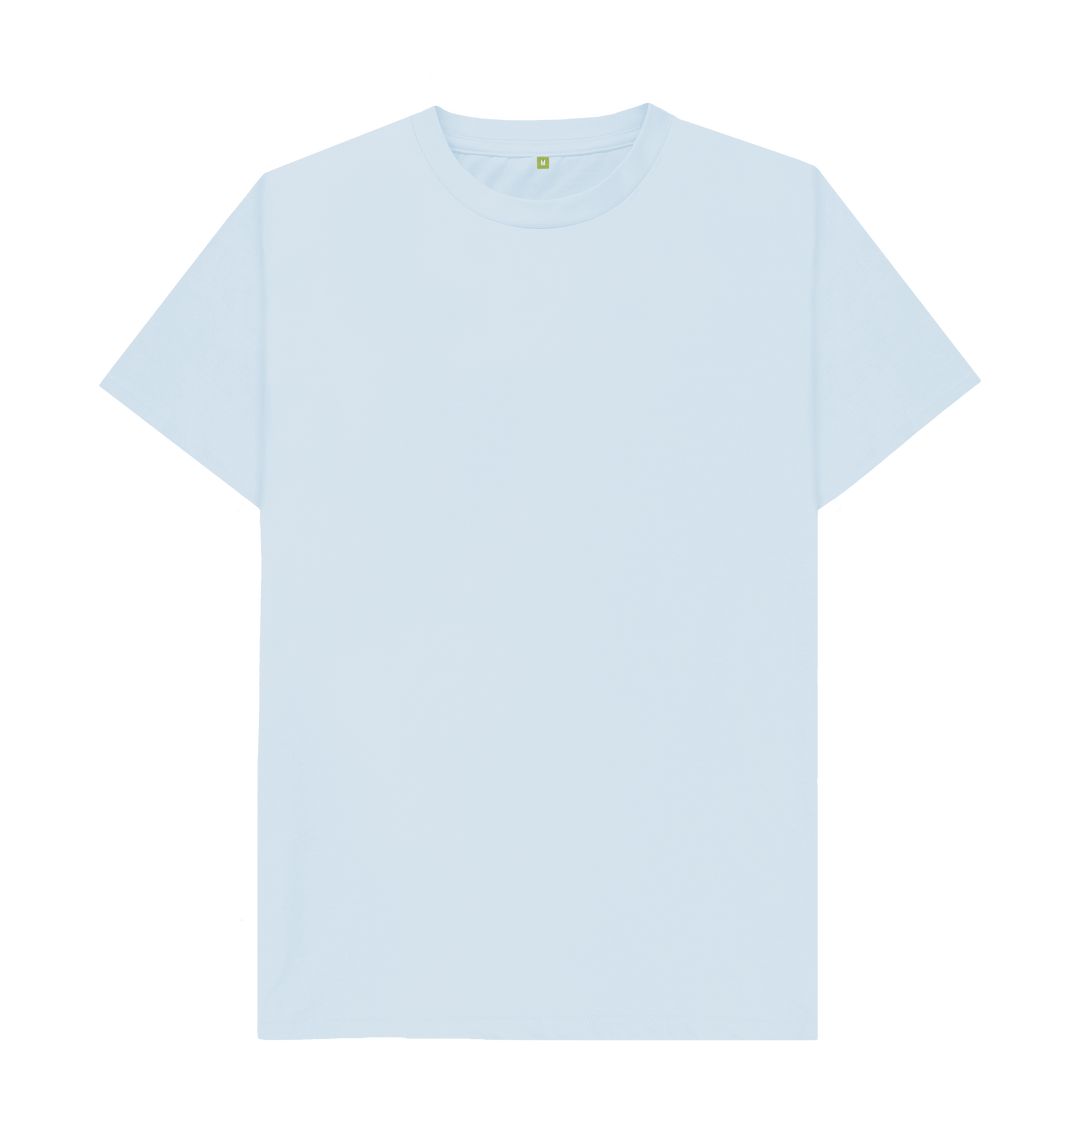 Sky Blue Simple Stuff fitted tee